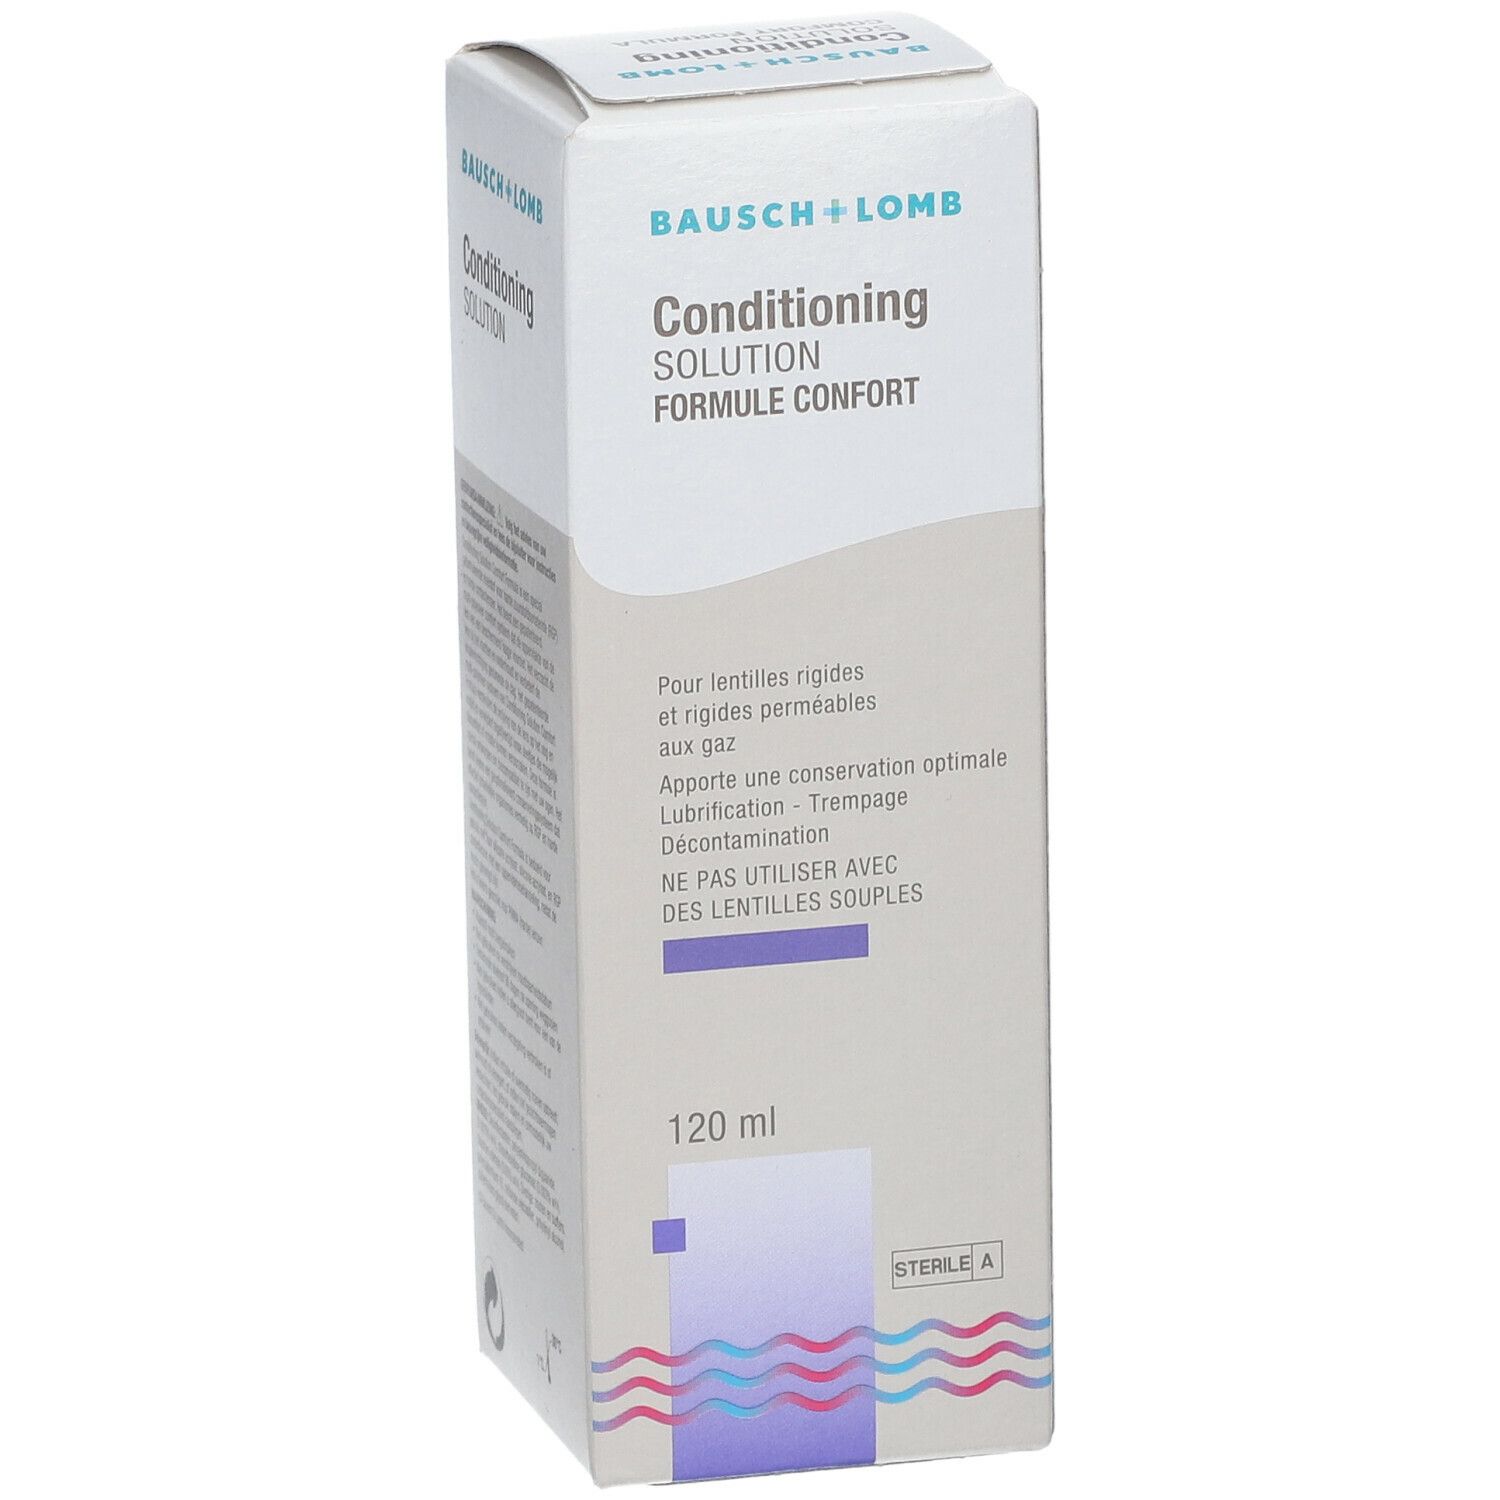 Bausch & Lomb Conditioning Solution